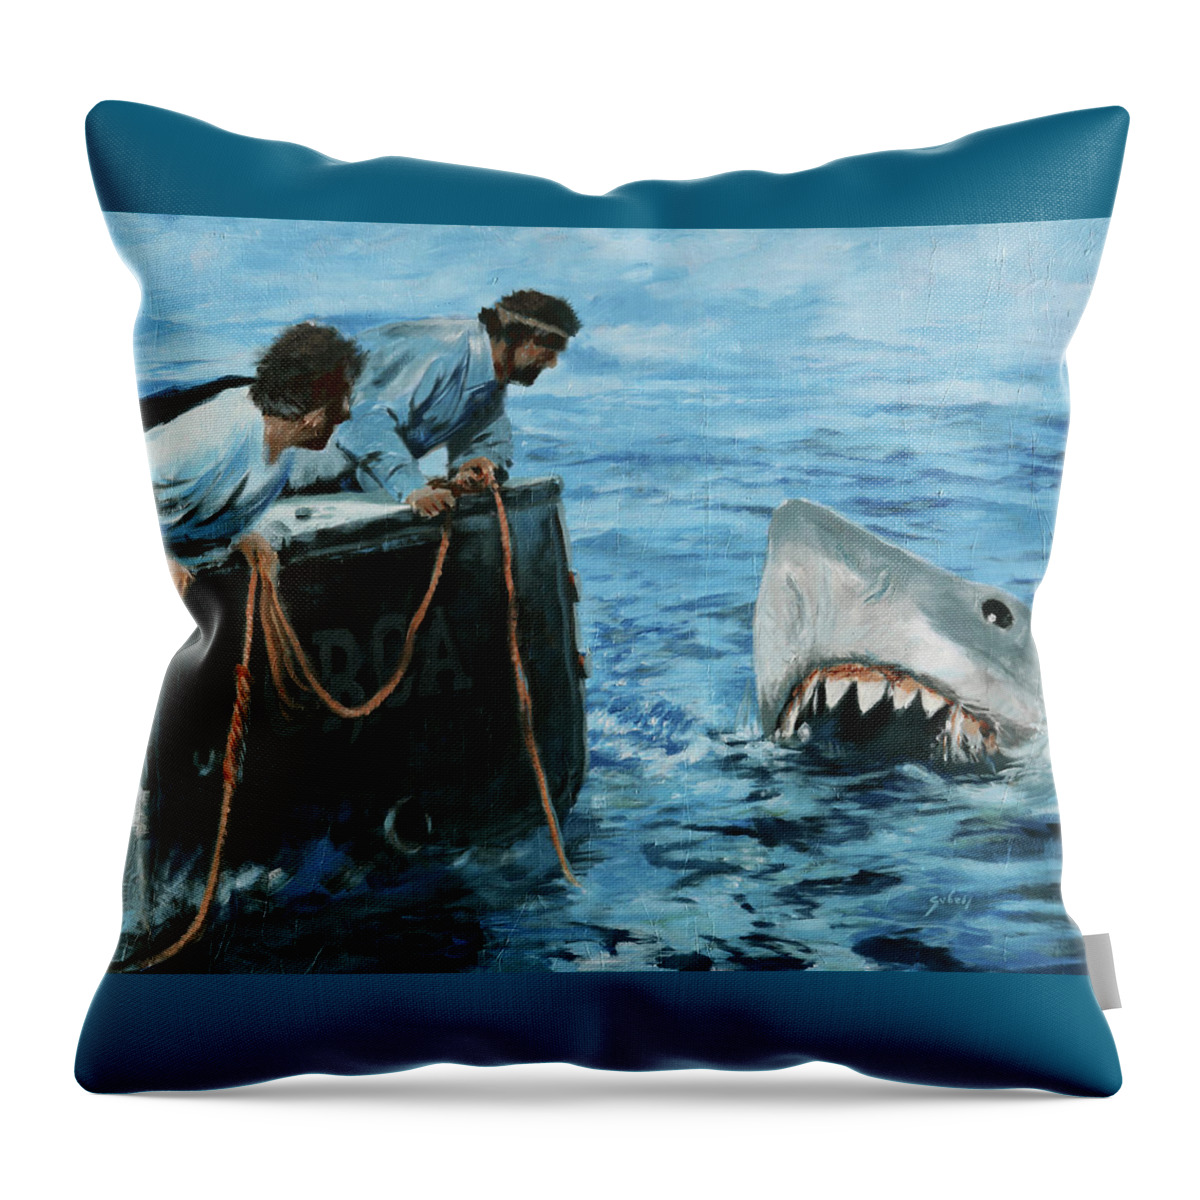 Jaws Throw Pillow featuring the painting Jaws tribute - A bigger boat by Sv Bell